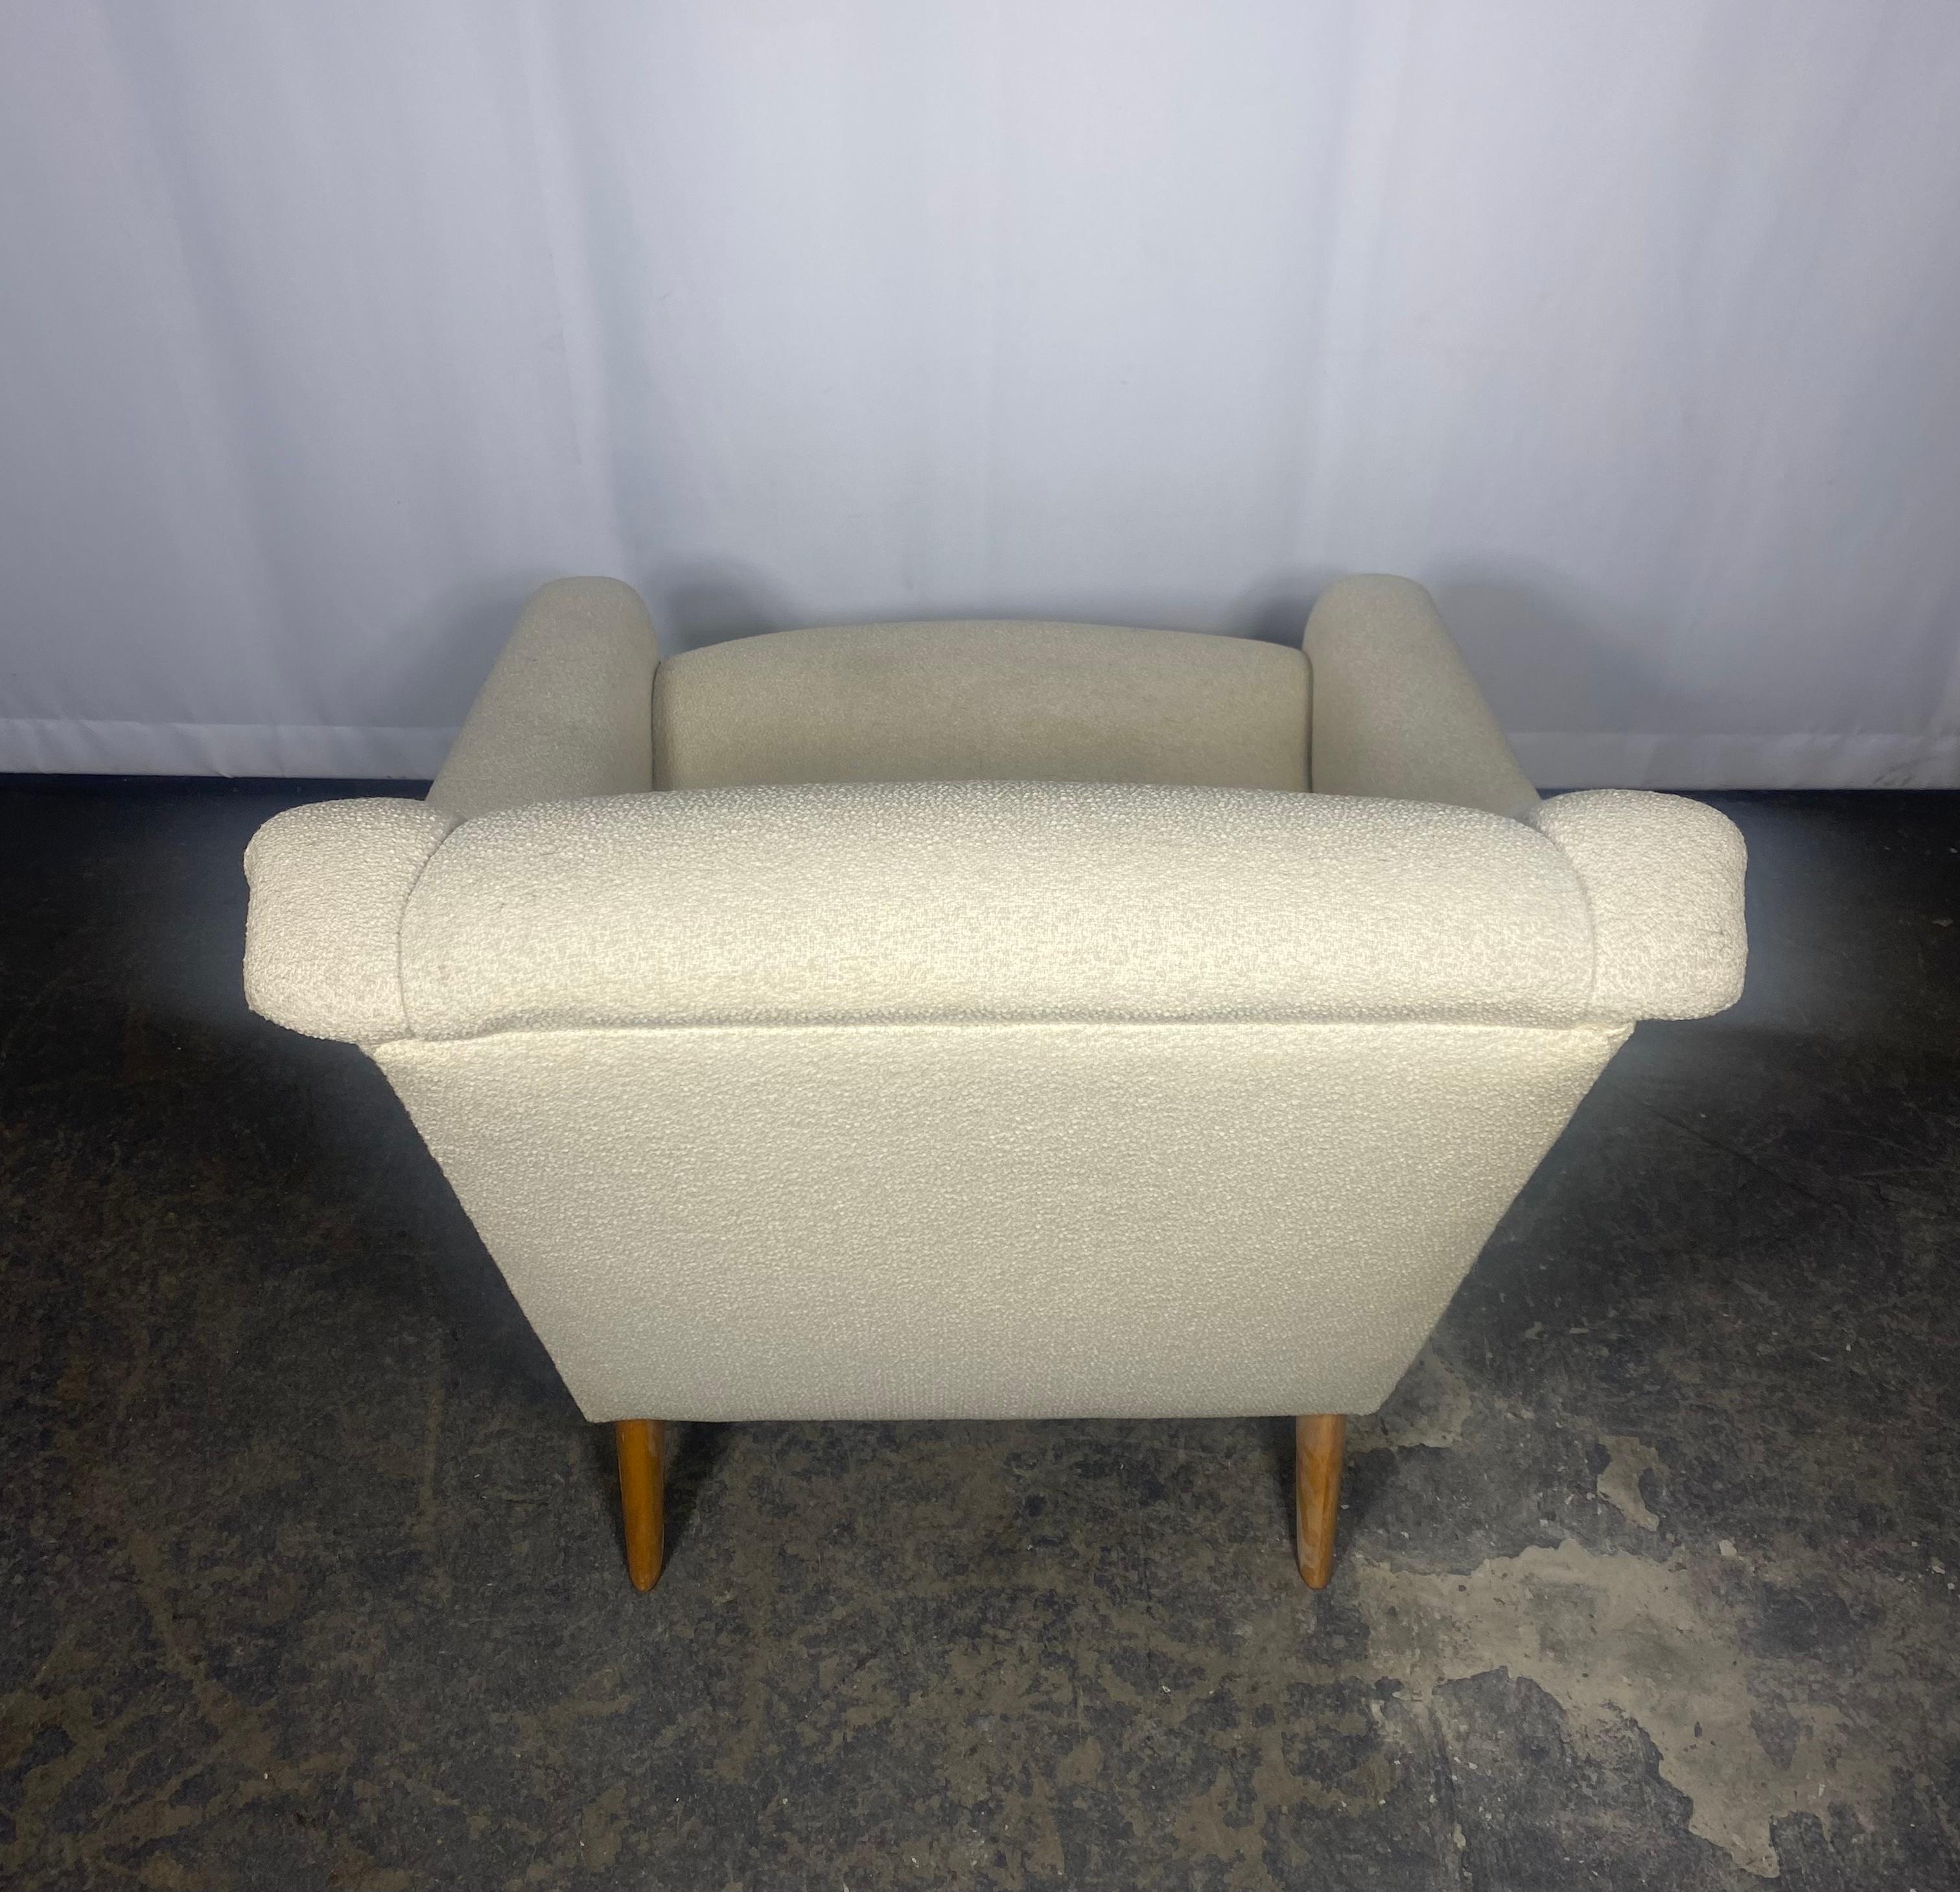 Classic Modernist Lounge Chair by Heywood Wakefield , after Gio Ponti In Good Condition For Sale In Buffalo, NY